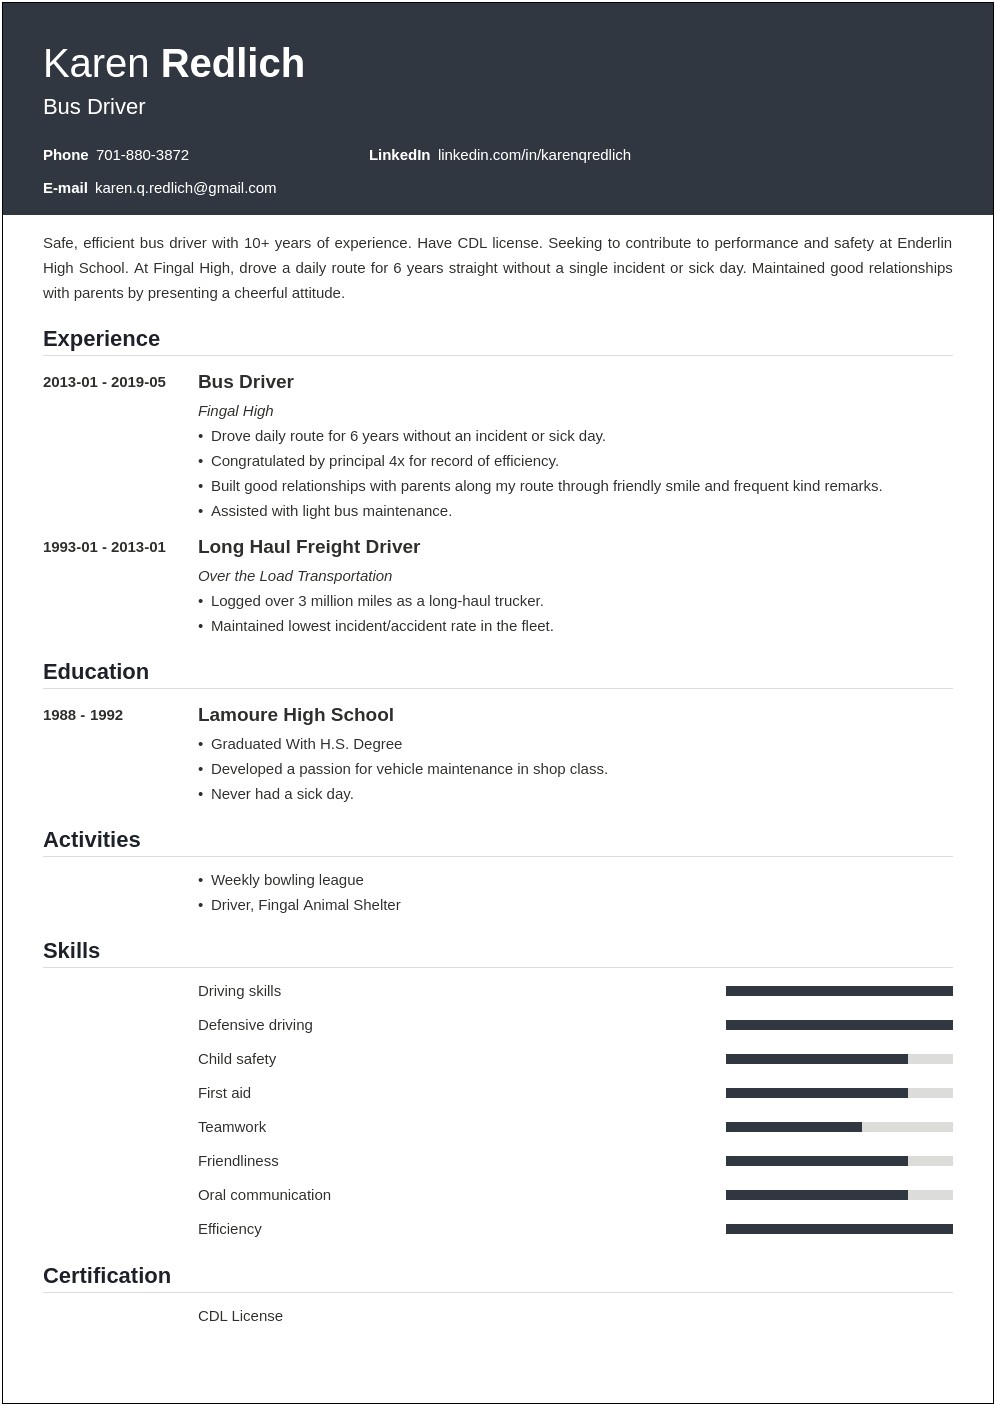 Resume Entry For School Bus Driver